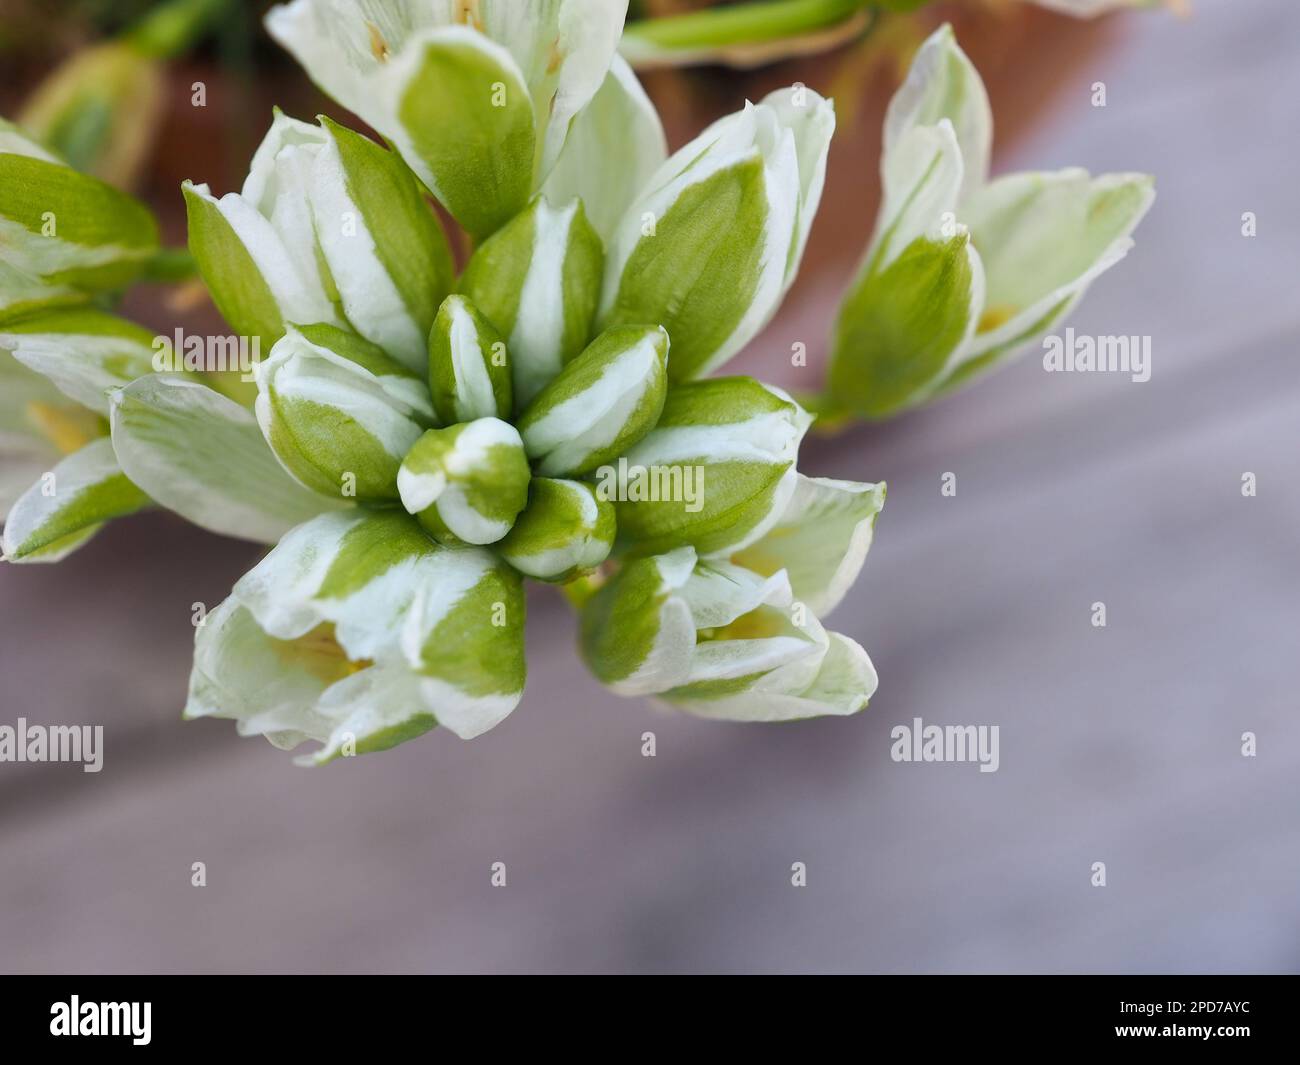 Close up of the opening green and white flower buds of Ornithogalum balansae (Star of Bethlehem), a late winter flowering bulb plant Stock Photo